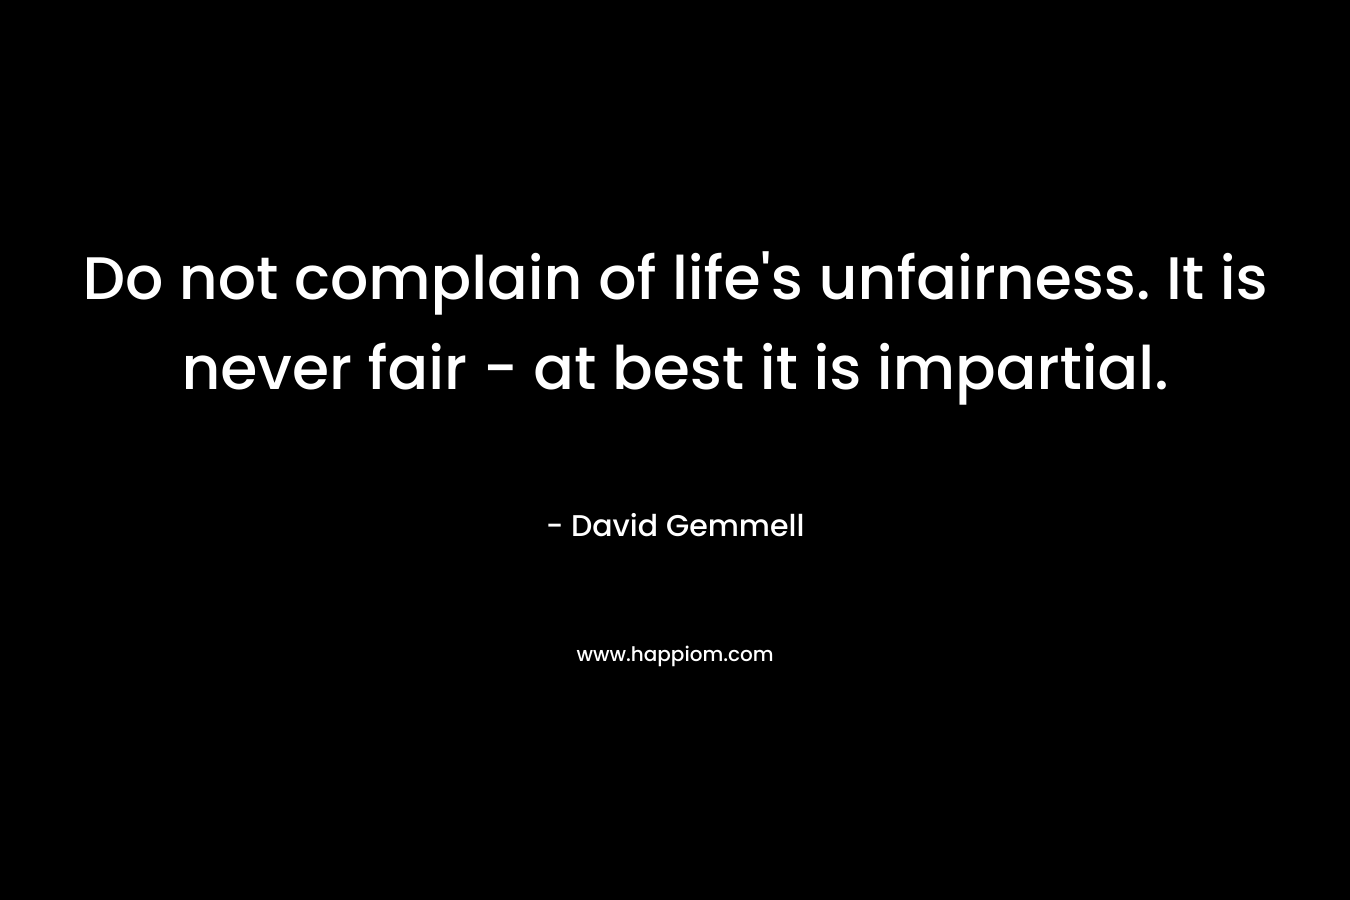 Do not complain of life’s unfairness. It is never fair – at best it is impartial. – David Gemmell